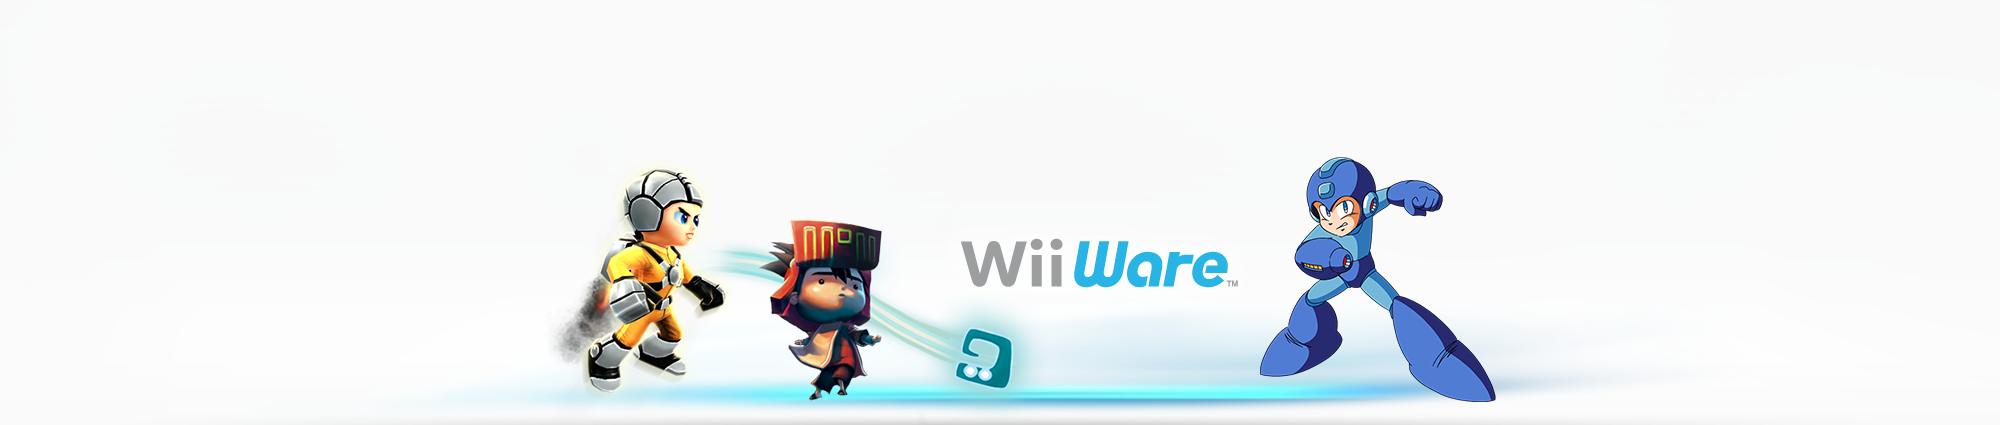 Download Games on Wii